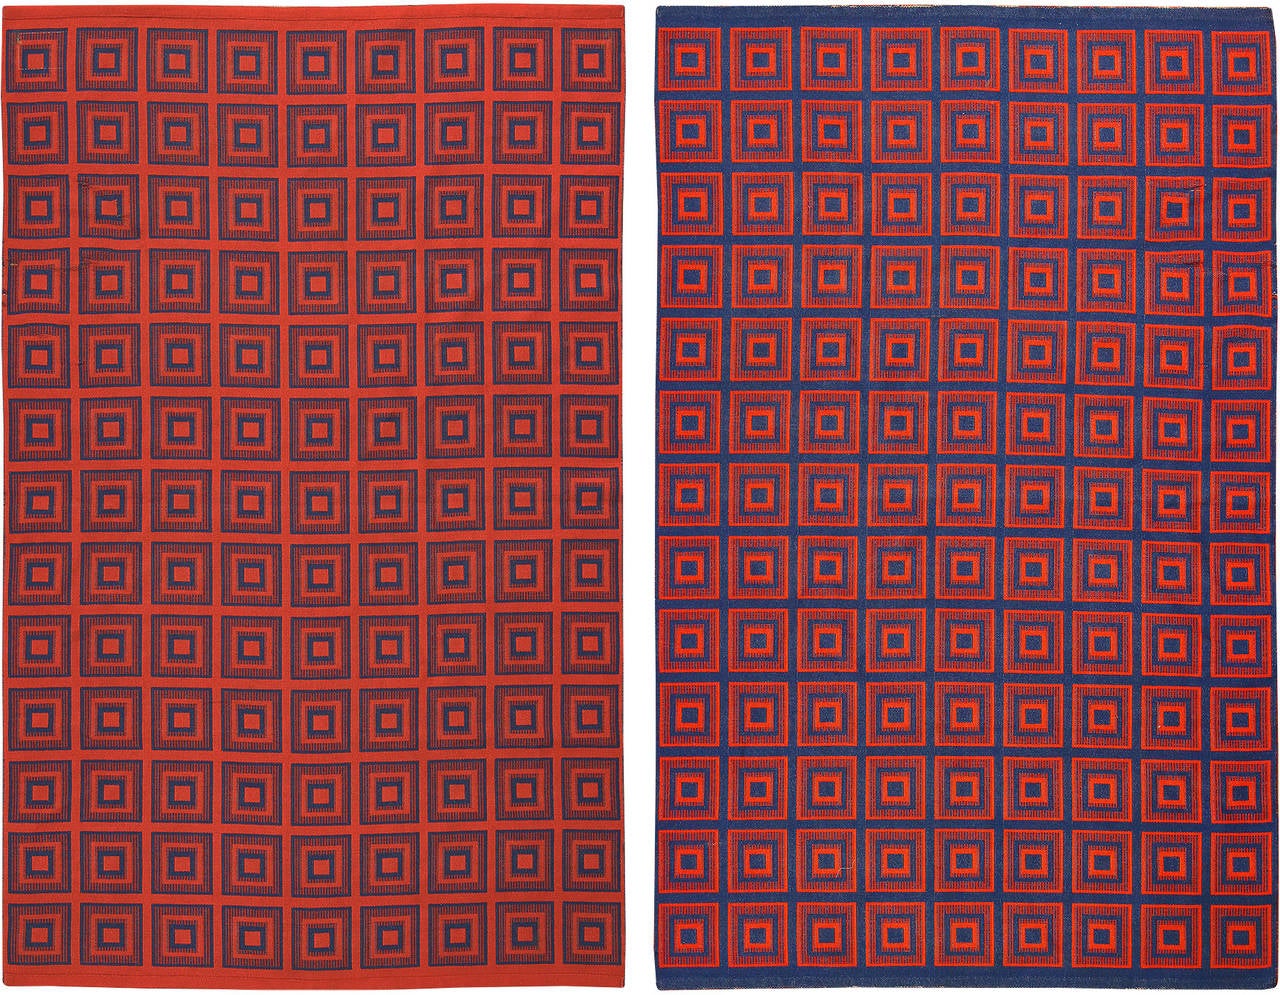 Double-sided Kilim, Sweden, circa 2000. Size: 5 ft x 7 ft 8 in (1.52 m x 2.34 m)

This pop art-esque double sided Swedish kilim owes it’s design to Scandinavian tradition. A hypnotic pattern dominates the piece; a series of red-orange and cerulean